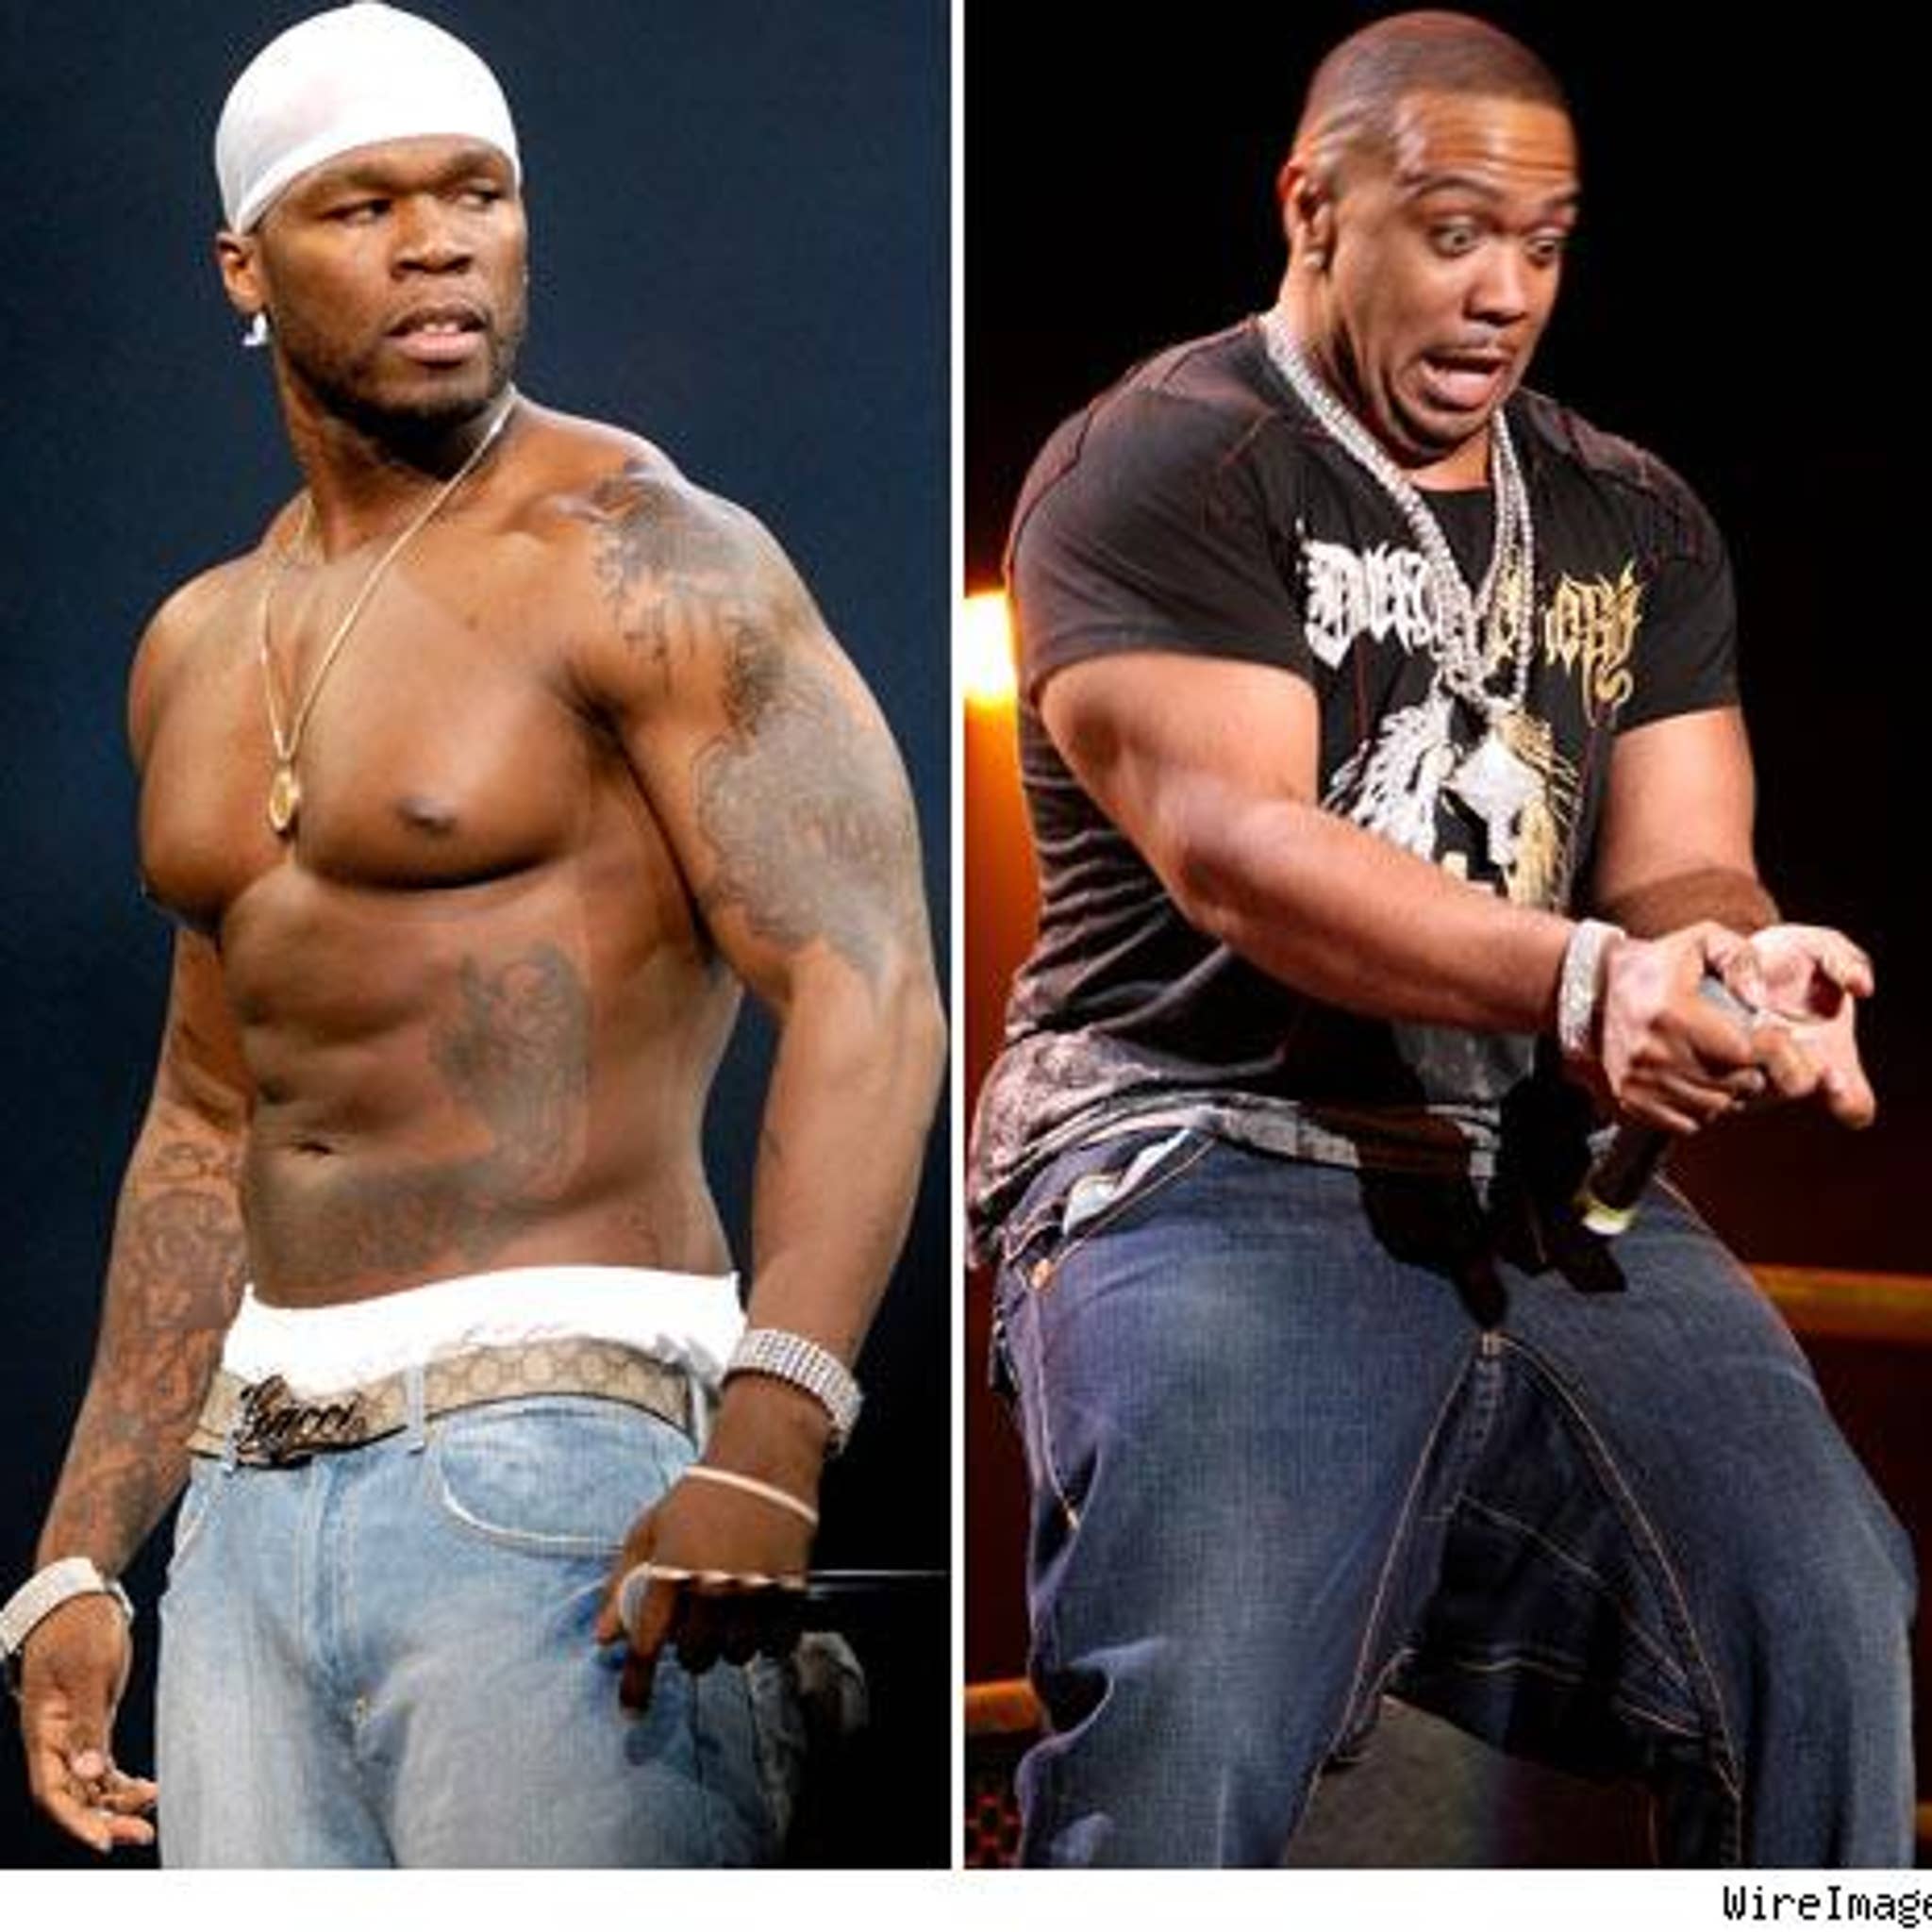 celebrities before and after steroids